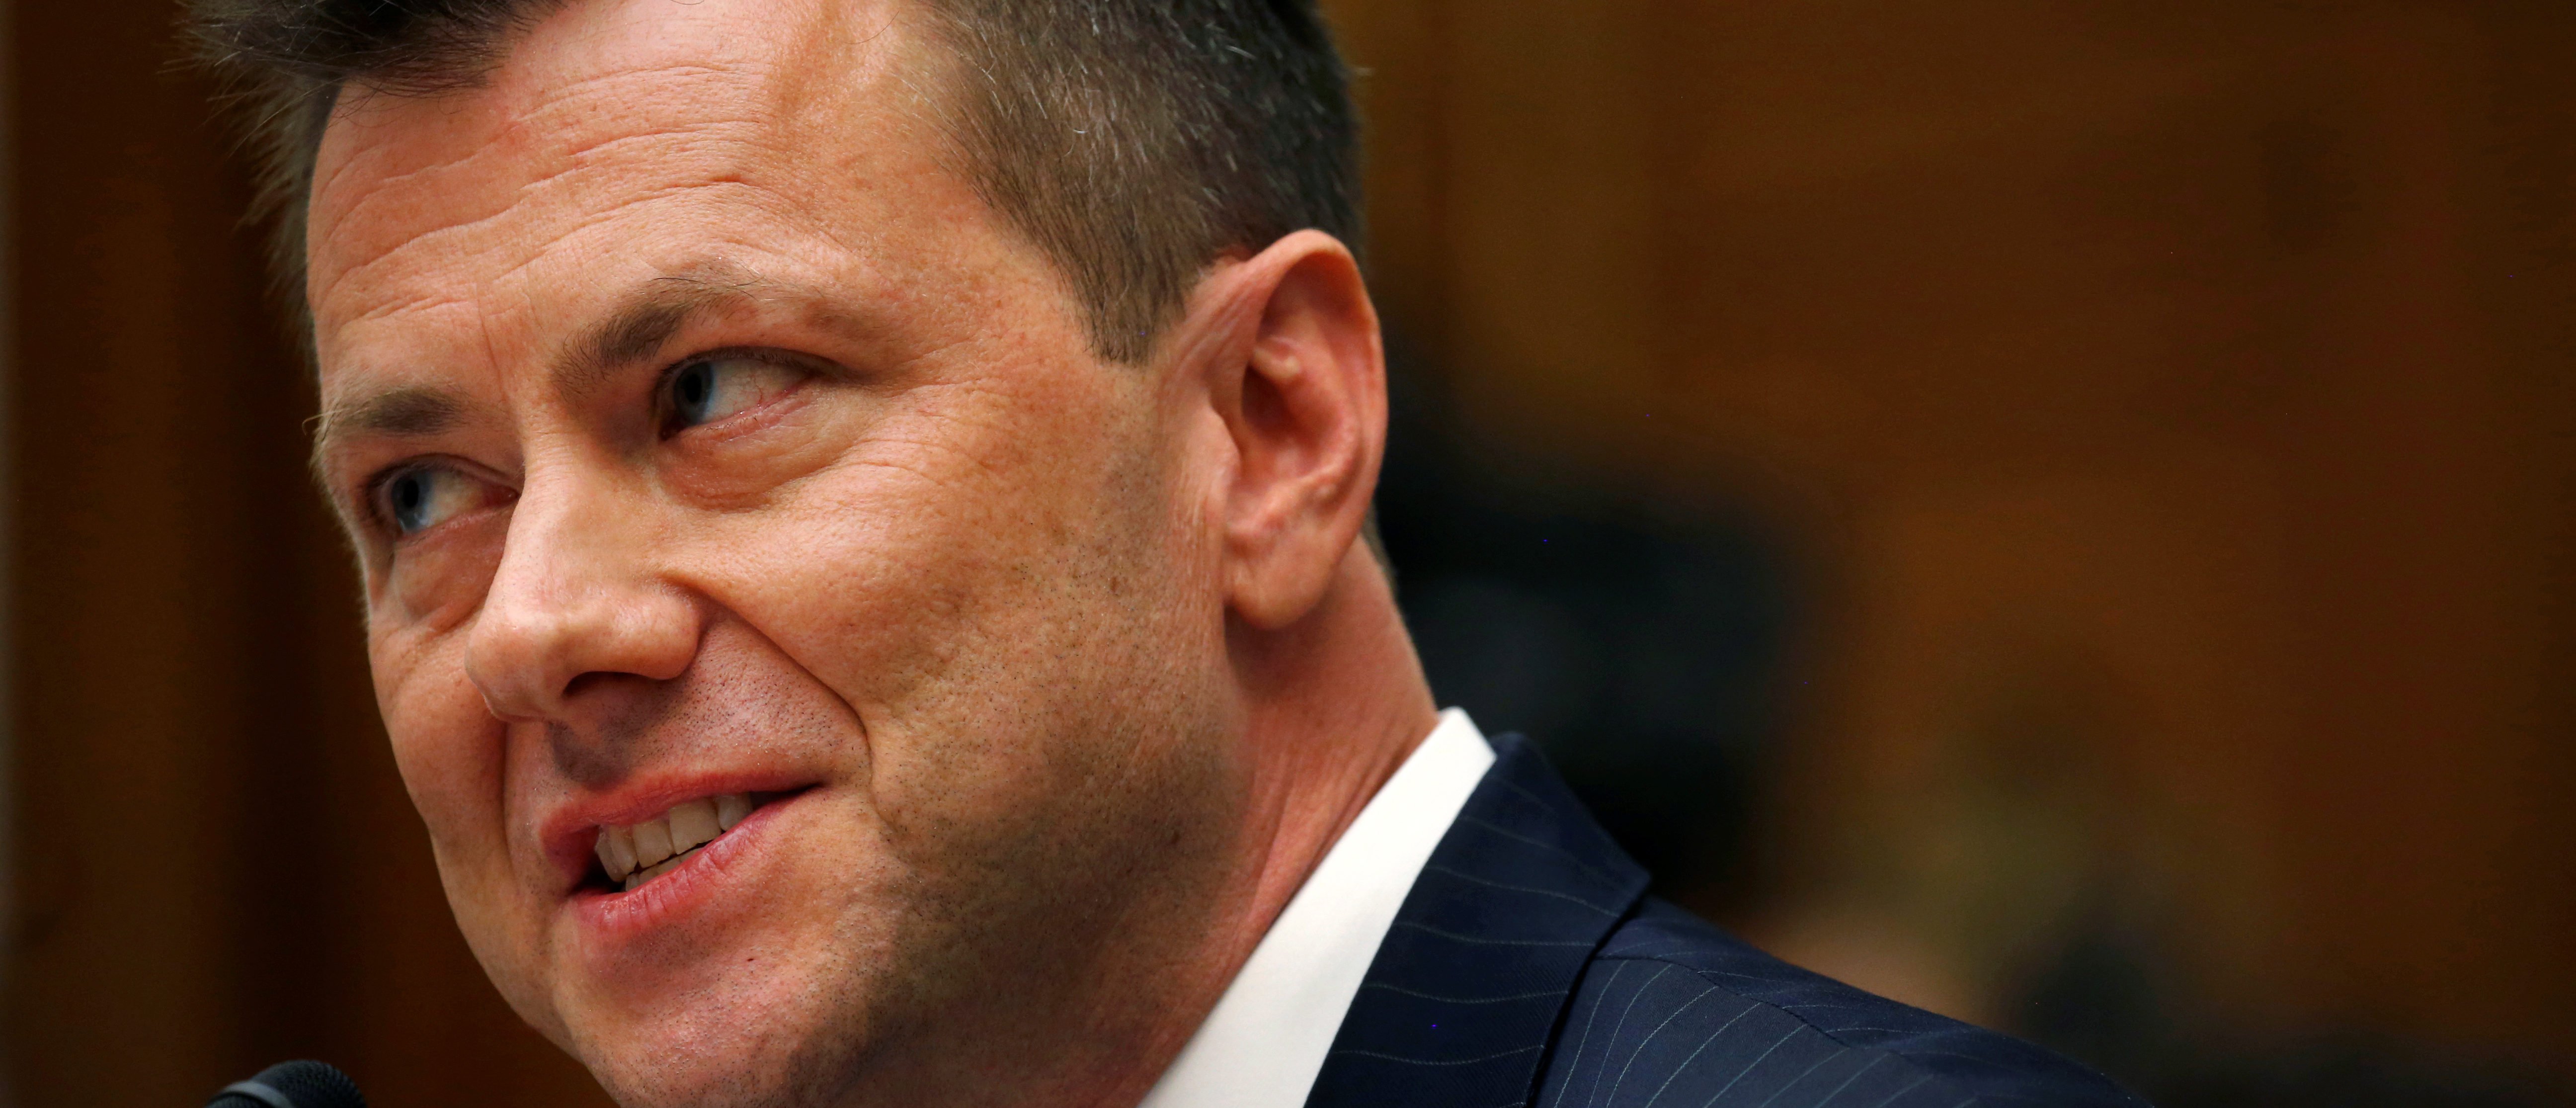 FBI Deputy Assistant Director Peter Strzok testifies before the House Committees on Judiciary and Oversight and Government Reform joint hearing on "Oversight of FBI and DOJ Actions Surrounding the 2016 Election" in the Rayburn House Office Building in Washington, U.S., July 12, 2018. REUTERS/Leah Millis - RC1653D04DE0